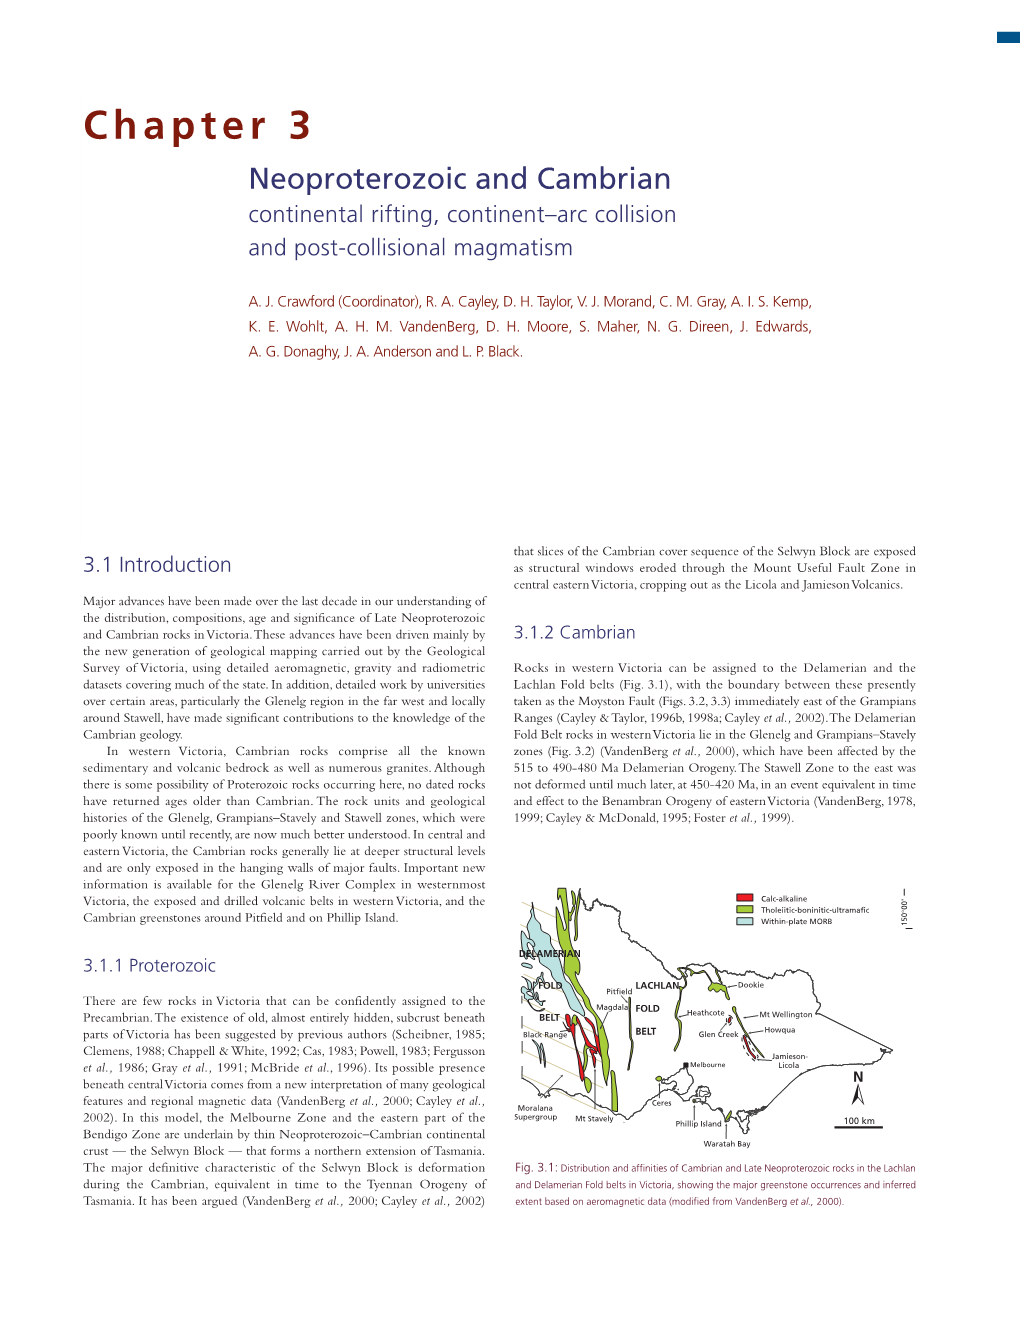 Chapter 3 Neoproterozoic and Cambrian Continental Rifting, Continent–Arc Collision and Post-Collisional Magmatism